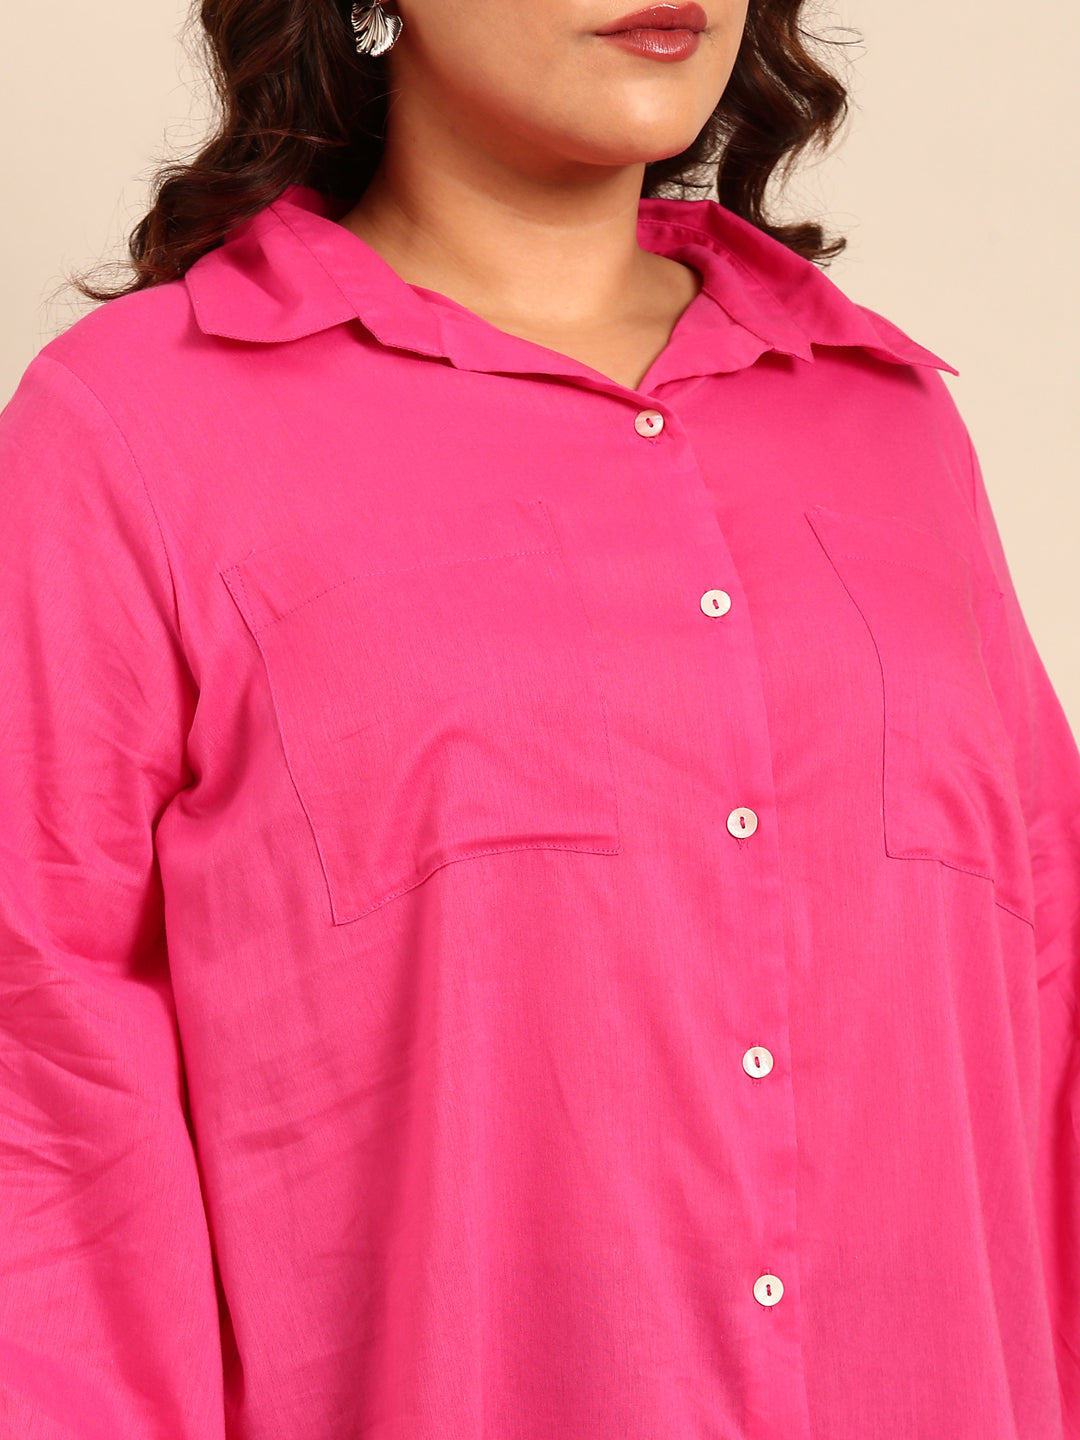 PINK SHIRT WITH BIG SLEEVES